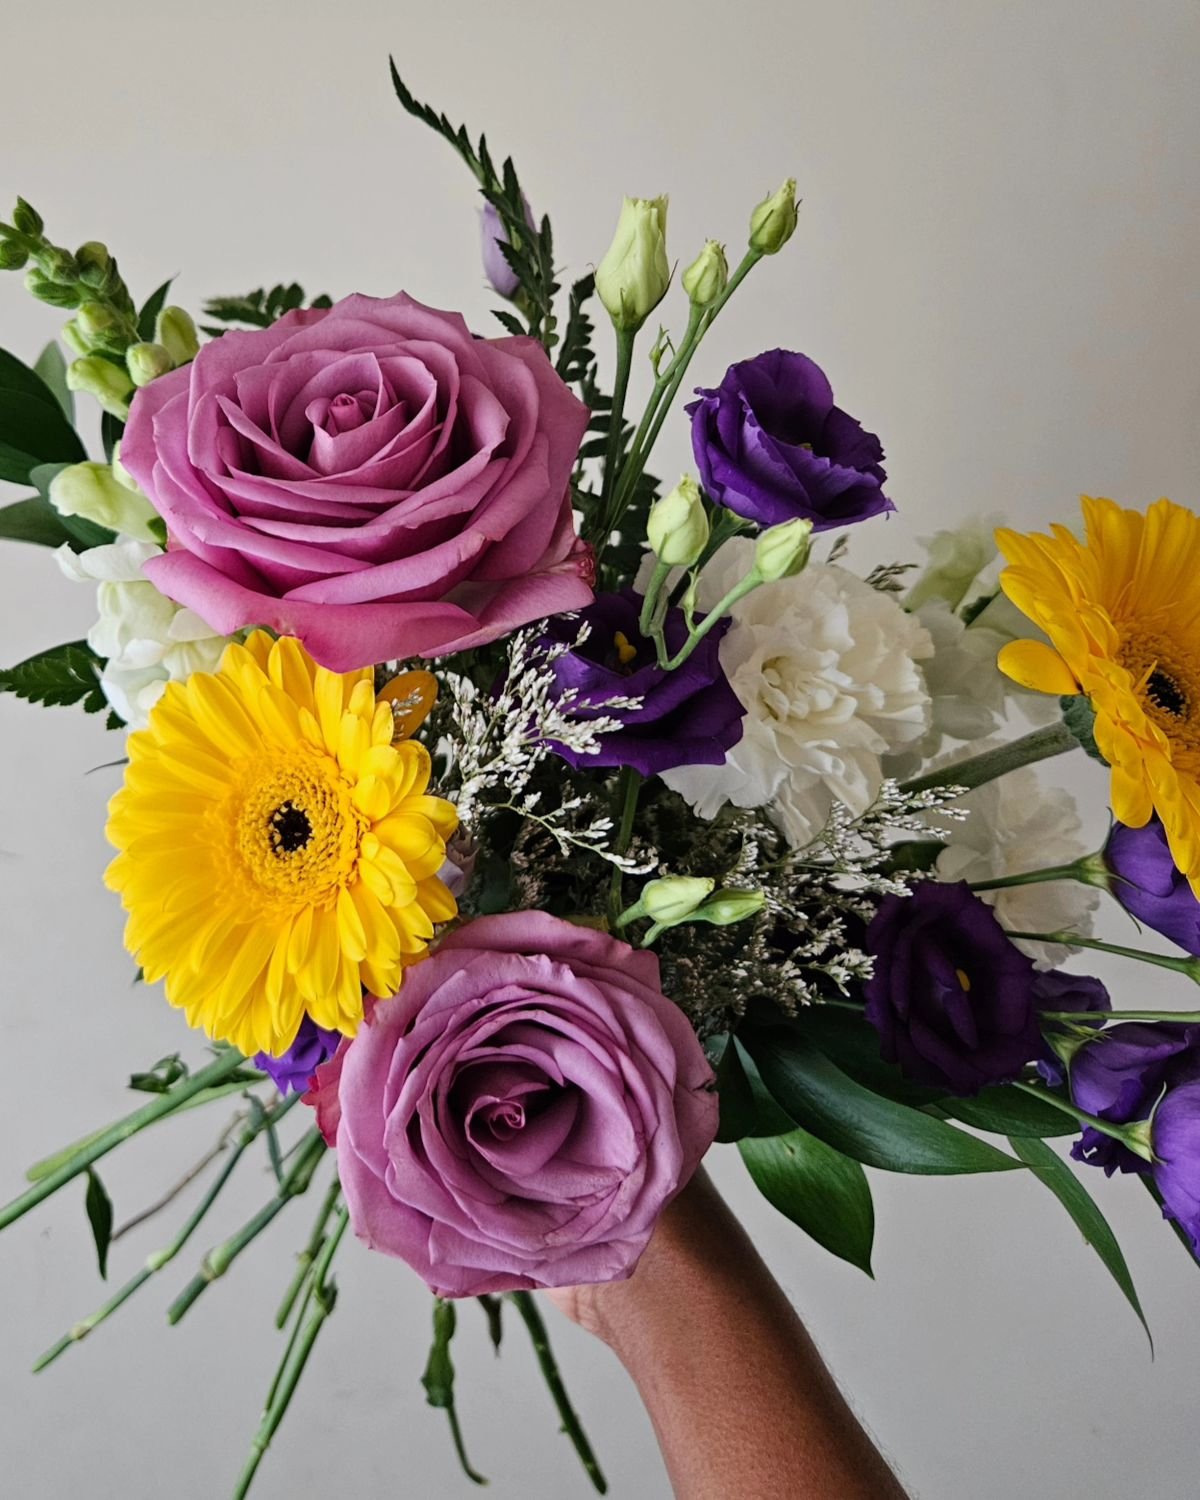 Flower Play: Hand-tied bouquet  with fresh blooms delivered by @bears_blooms 

Ingredients 
Lisianthus
Gerbera daisy
Snapdragon 
Rose
Carnation

#rebelliousstate #rebelliousblooms #torontoflorist #gtaflorist #blackowned #femaleowned #flowerstagram #f